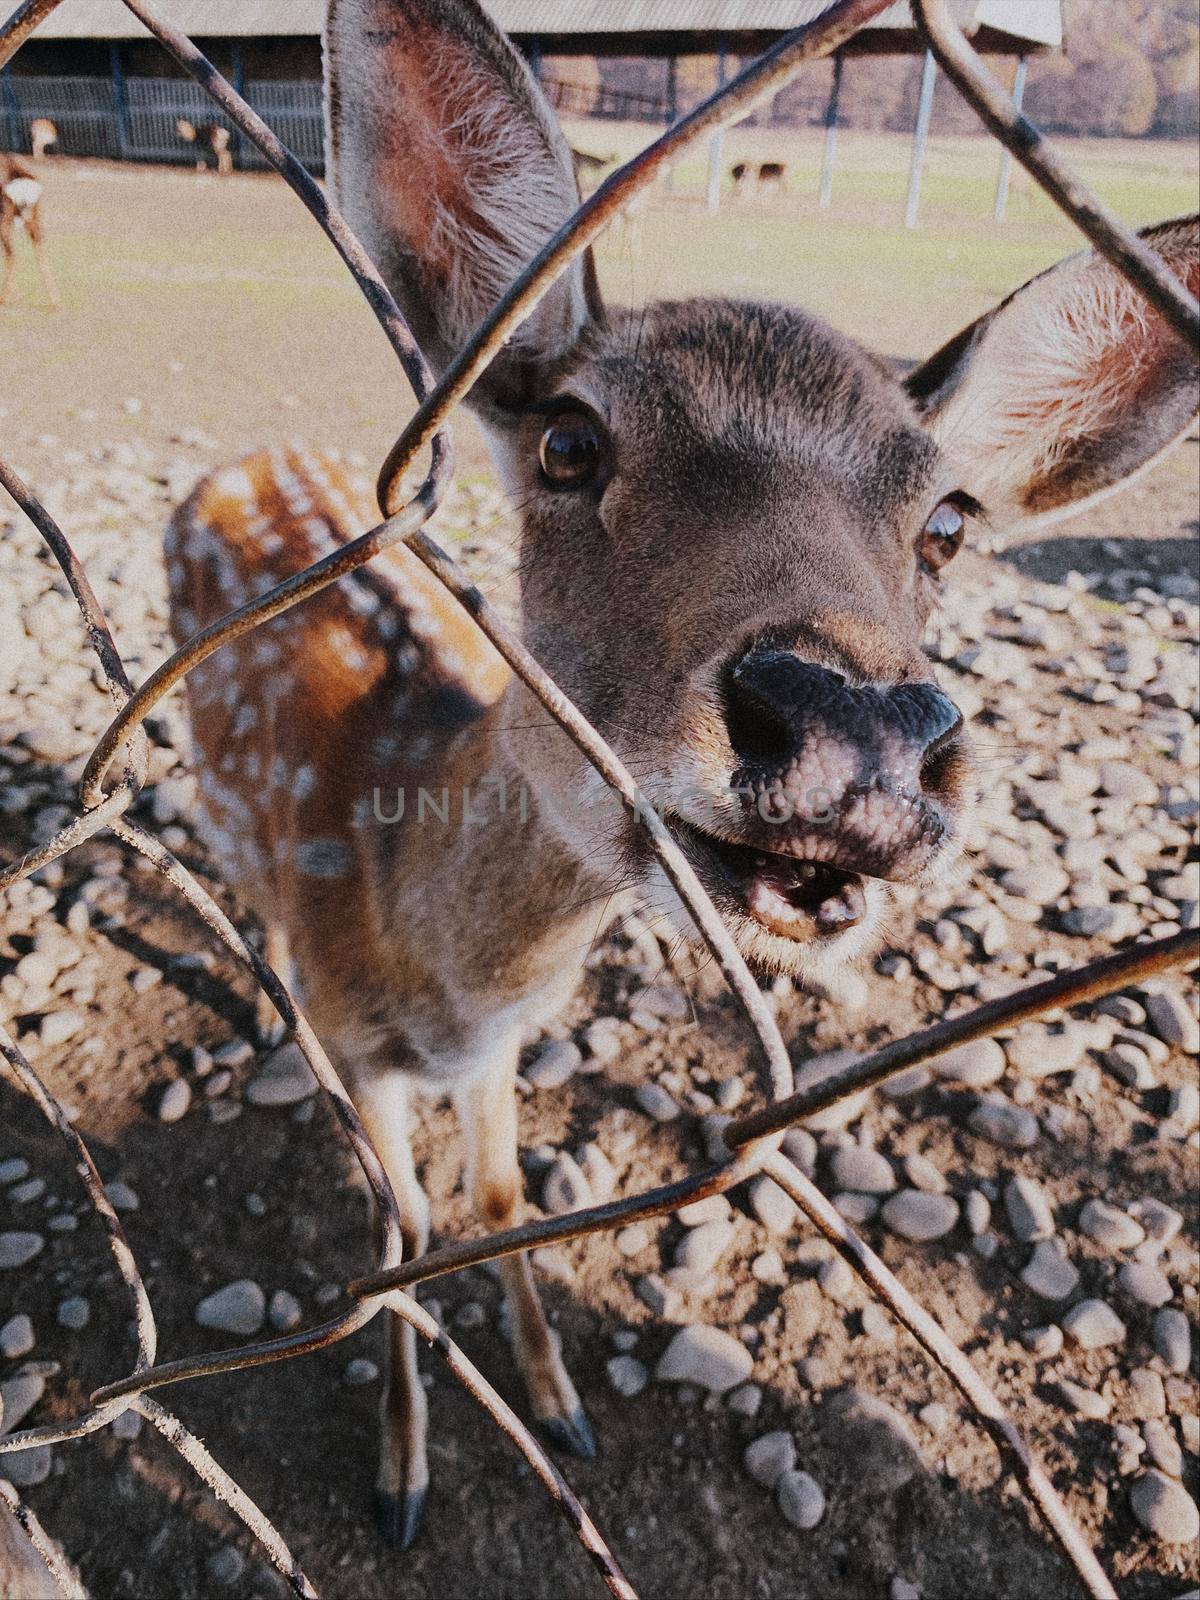 Deer looking to camera through fence in farm. Nature, beautiful animals concept.